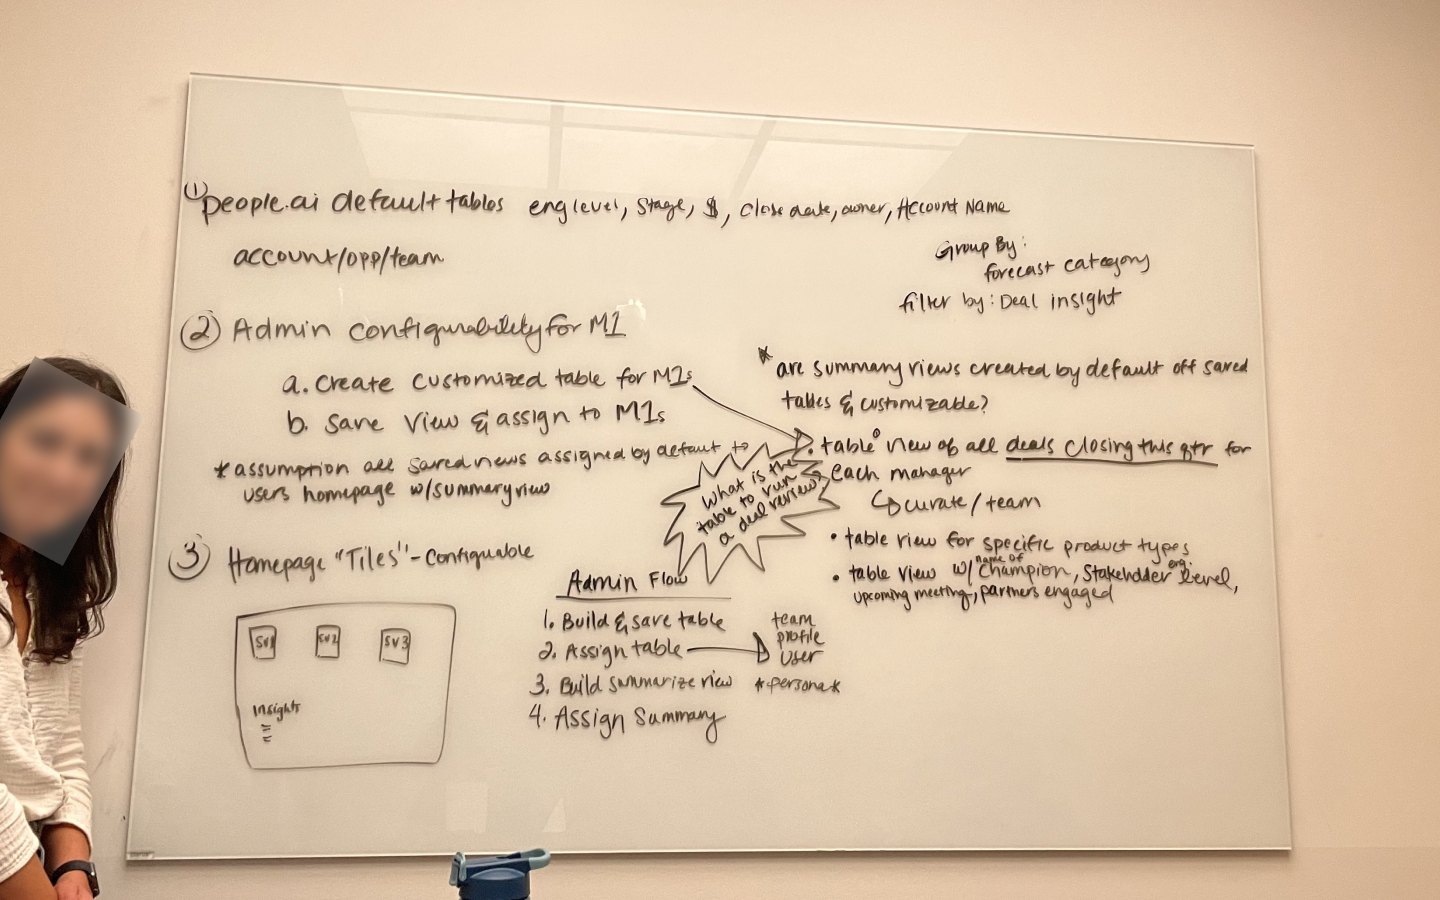 Image from a whiteboarding session describing concepts and features for an updated Sales Solution